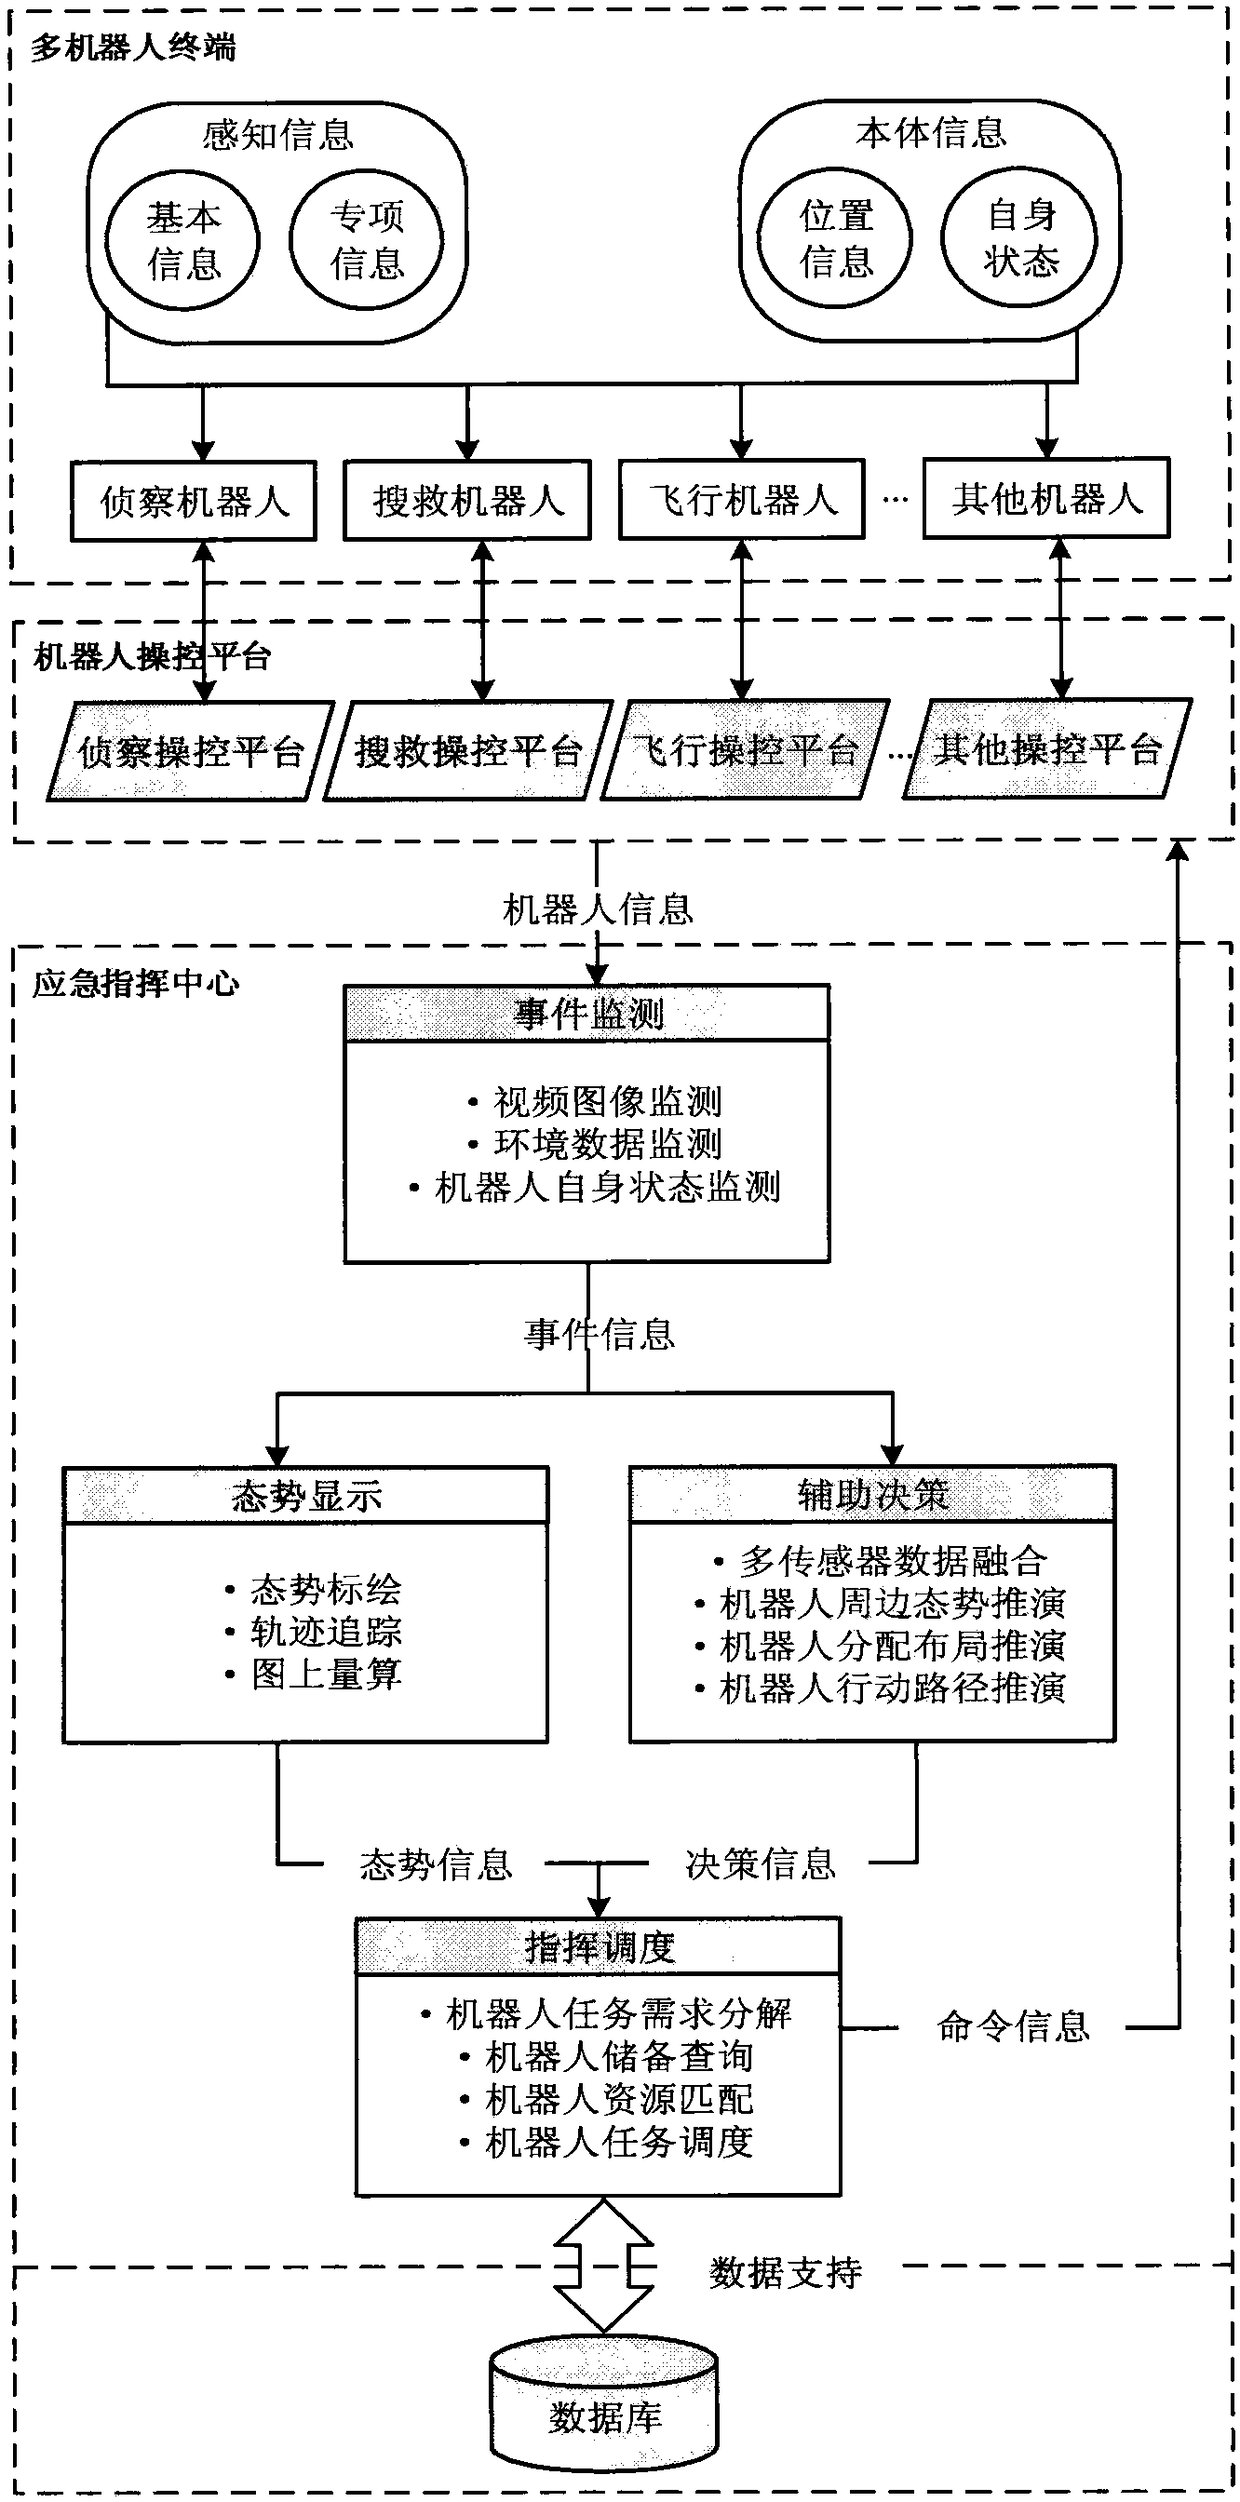 Multi-robot cooperation based public safety emergency command control system and method